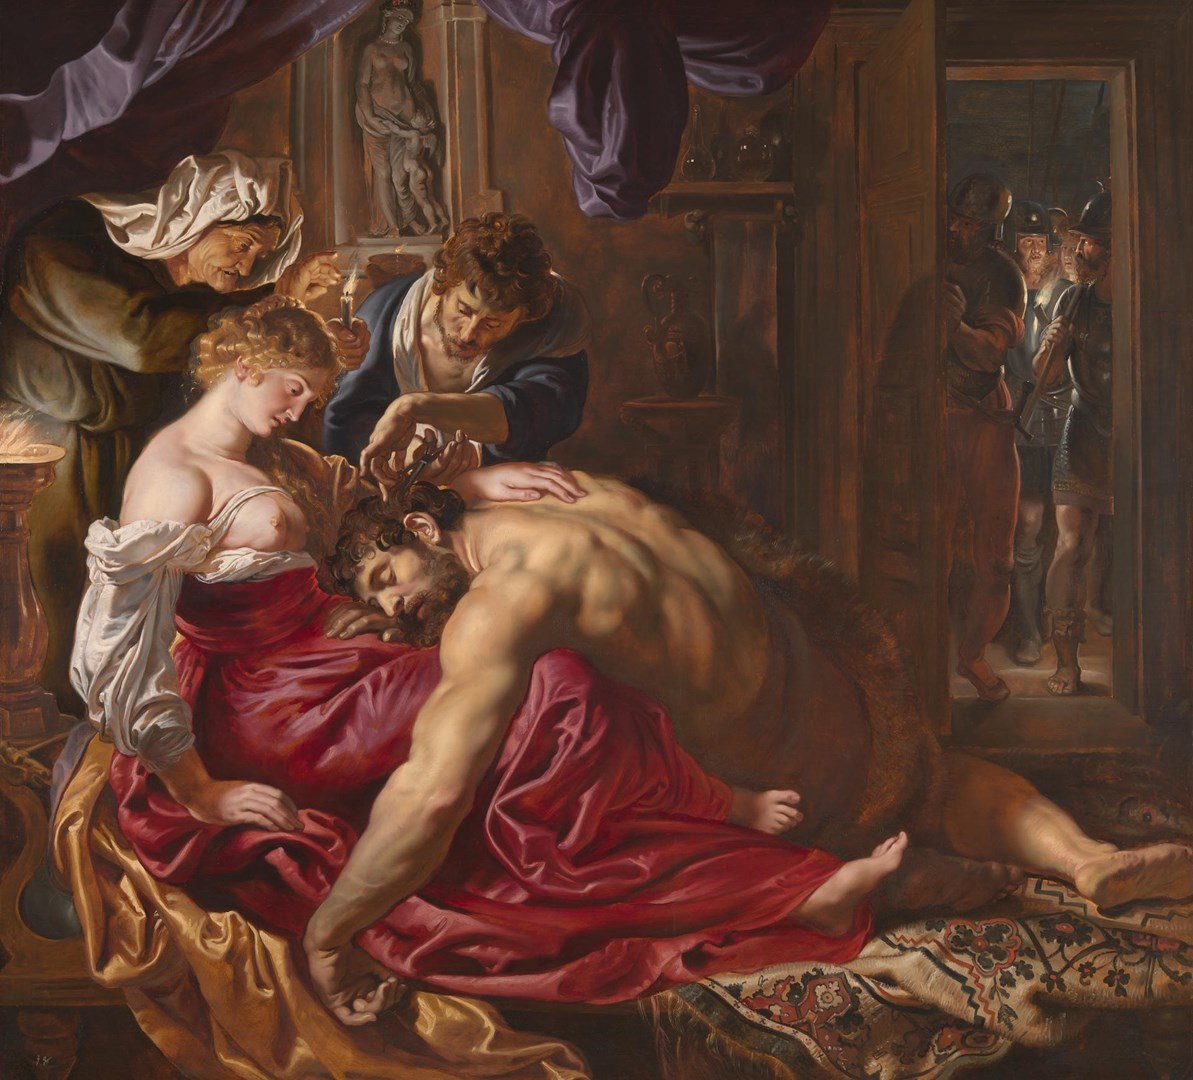 The National Gallery’s Prized Peter Paul Rubens Painting Is Actually a Fake, New Artificial Intelligence Testing Has Found